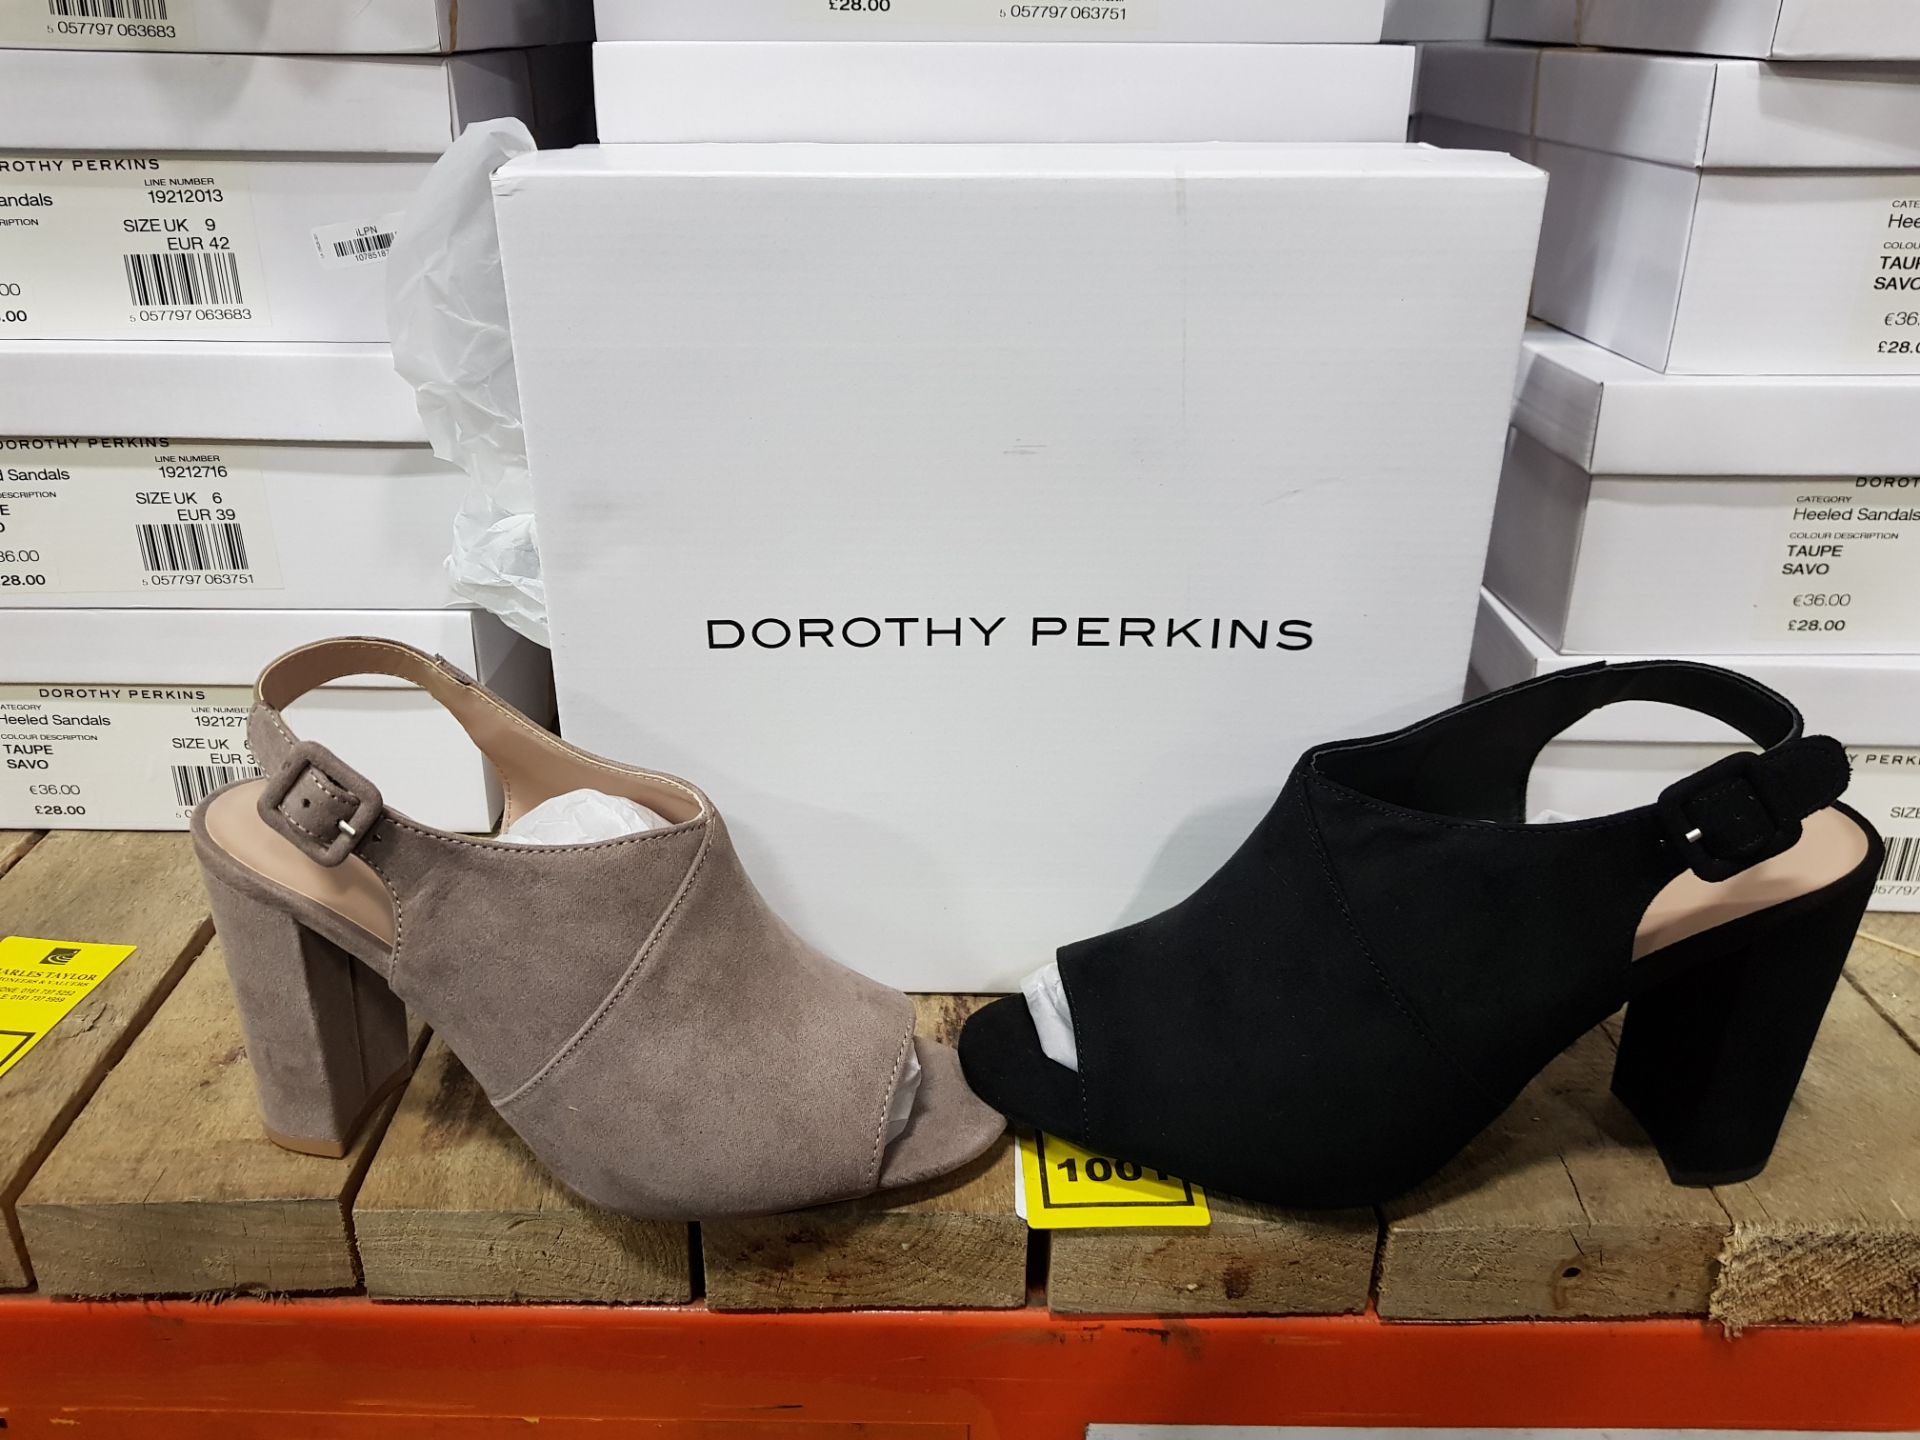 15 X BRAND NEW BOXED (DOROTHY PERKIN'S) WOMEN'S SHOES IN VARIOUS STYLES/SIZES RRP FROM £28.OO - £